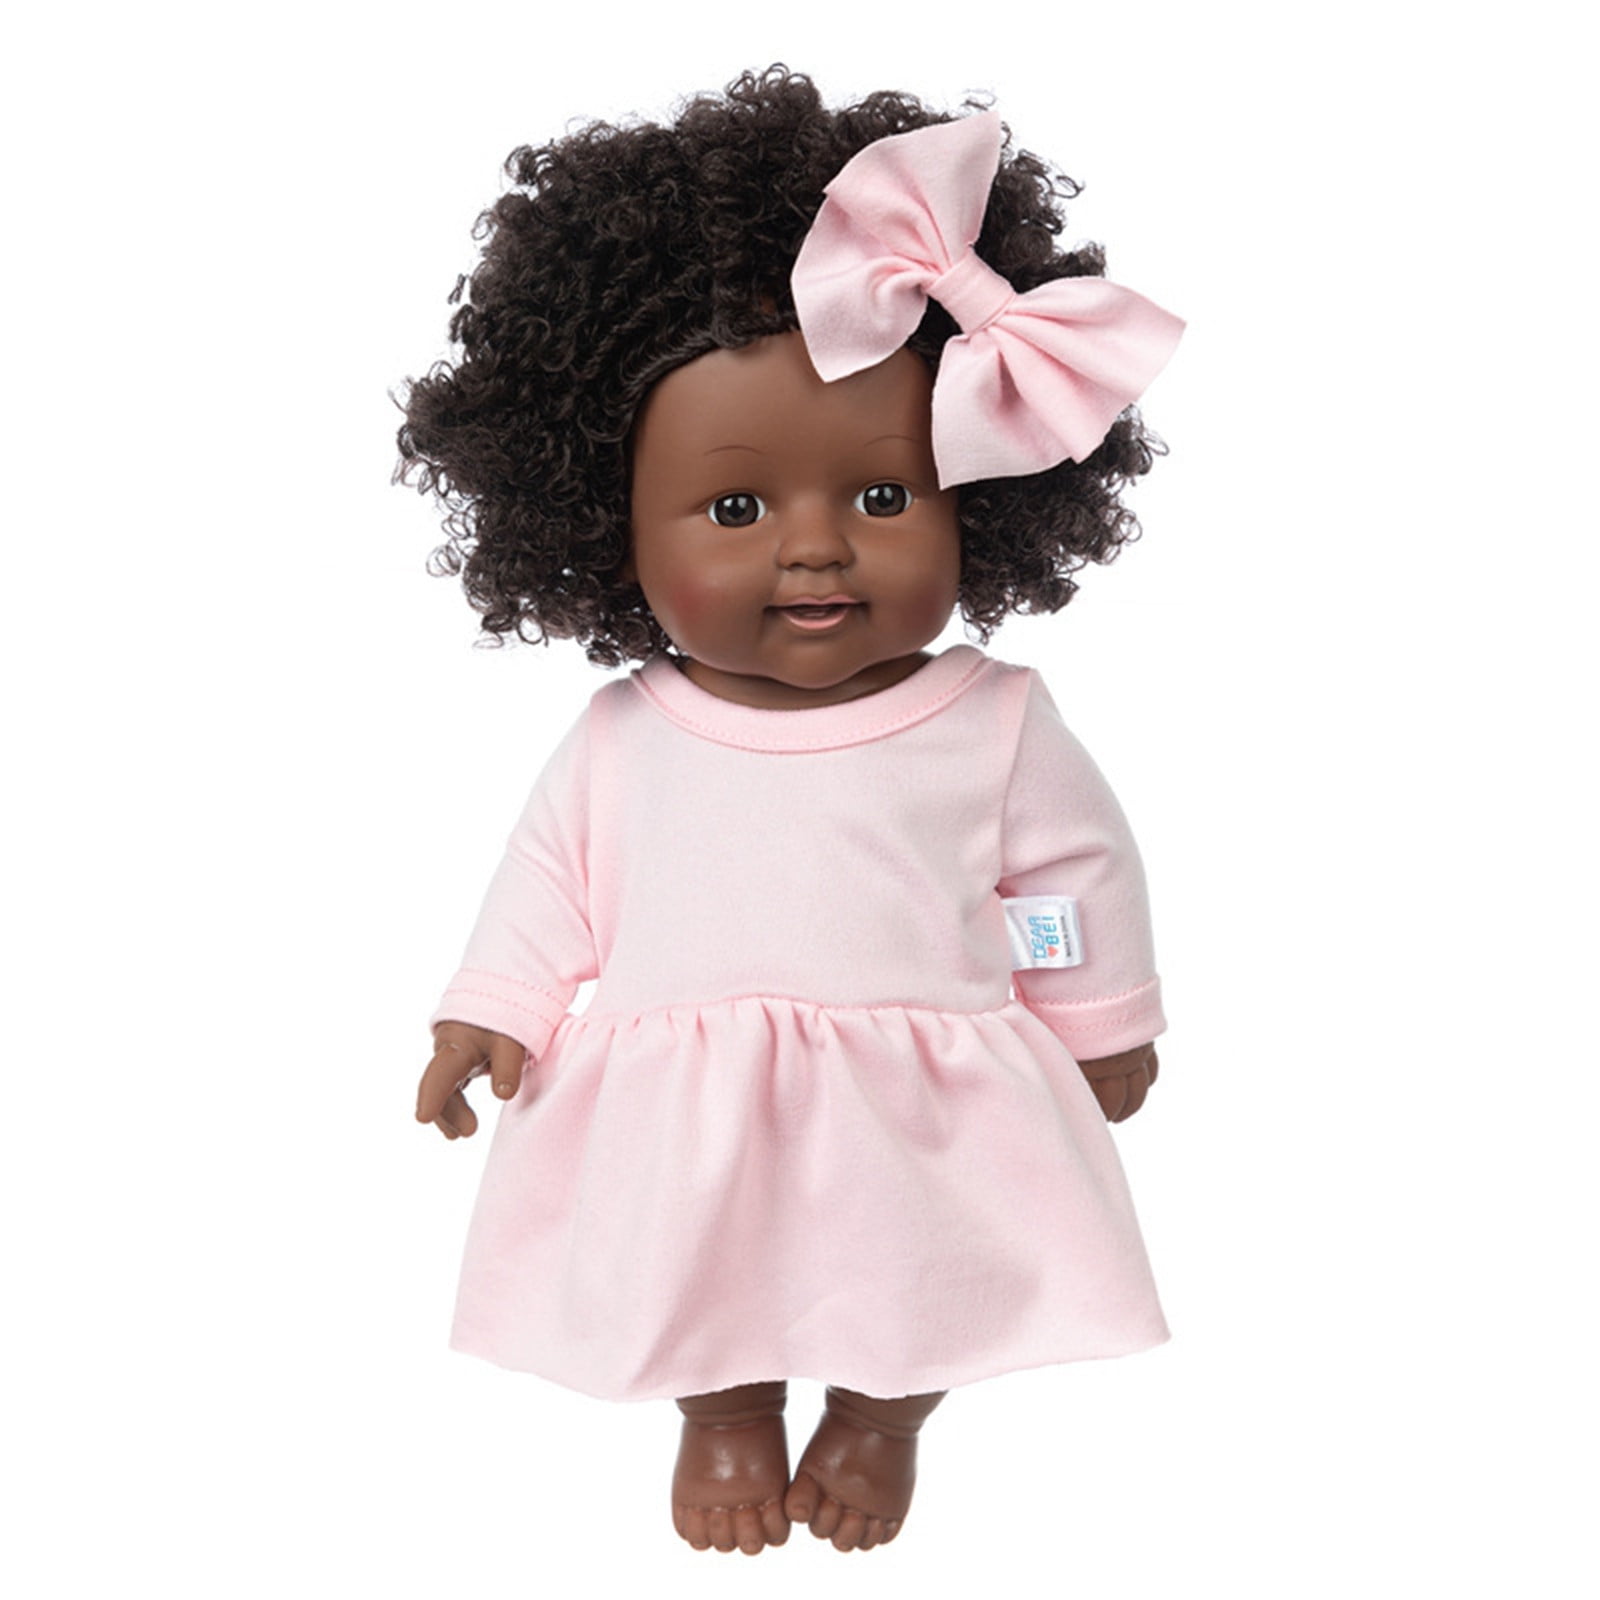 Tarmeek 11.8 Inch Black Baby Girl Doll and Clothes Set African American  Realistic Soft Silicone Washable Dark Skin Baby Doll with Curly Hair  Jumpsuit